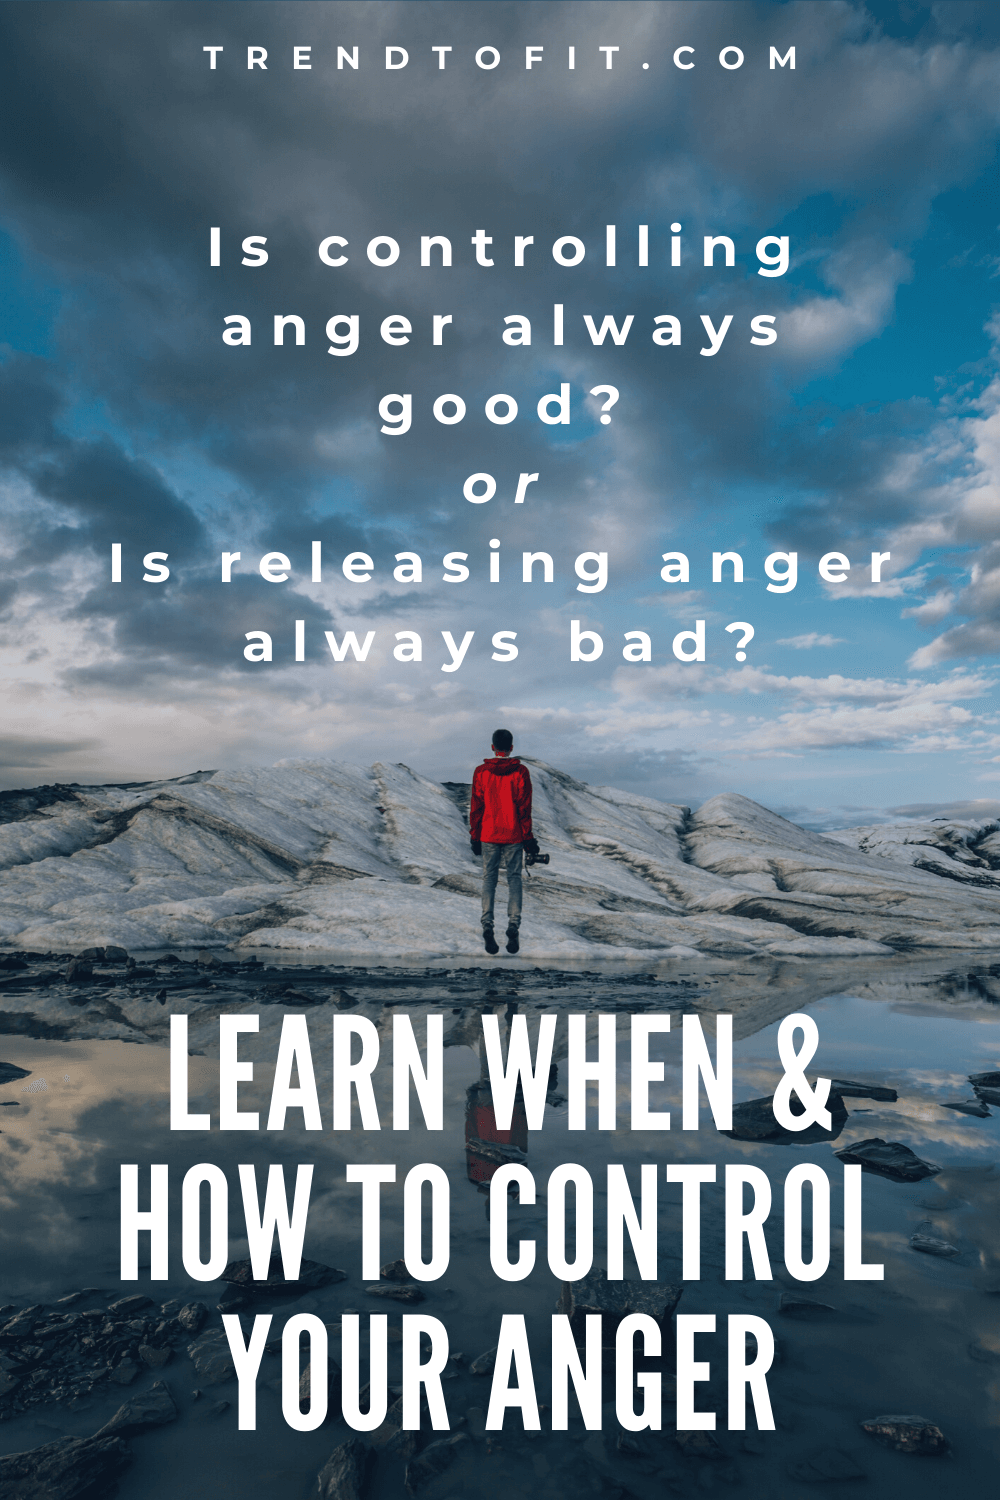 learn when, why, and how to control your anger with these tips